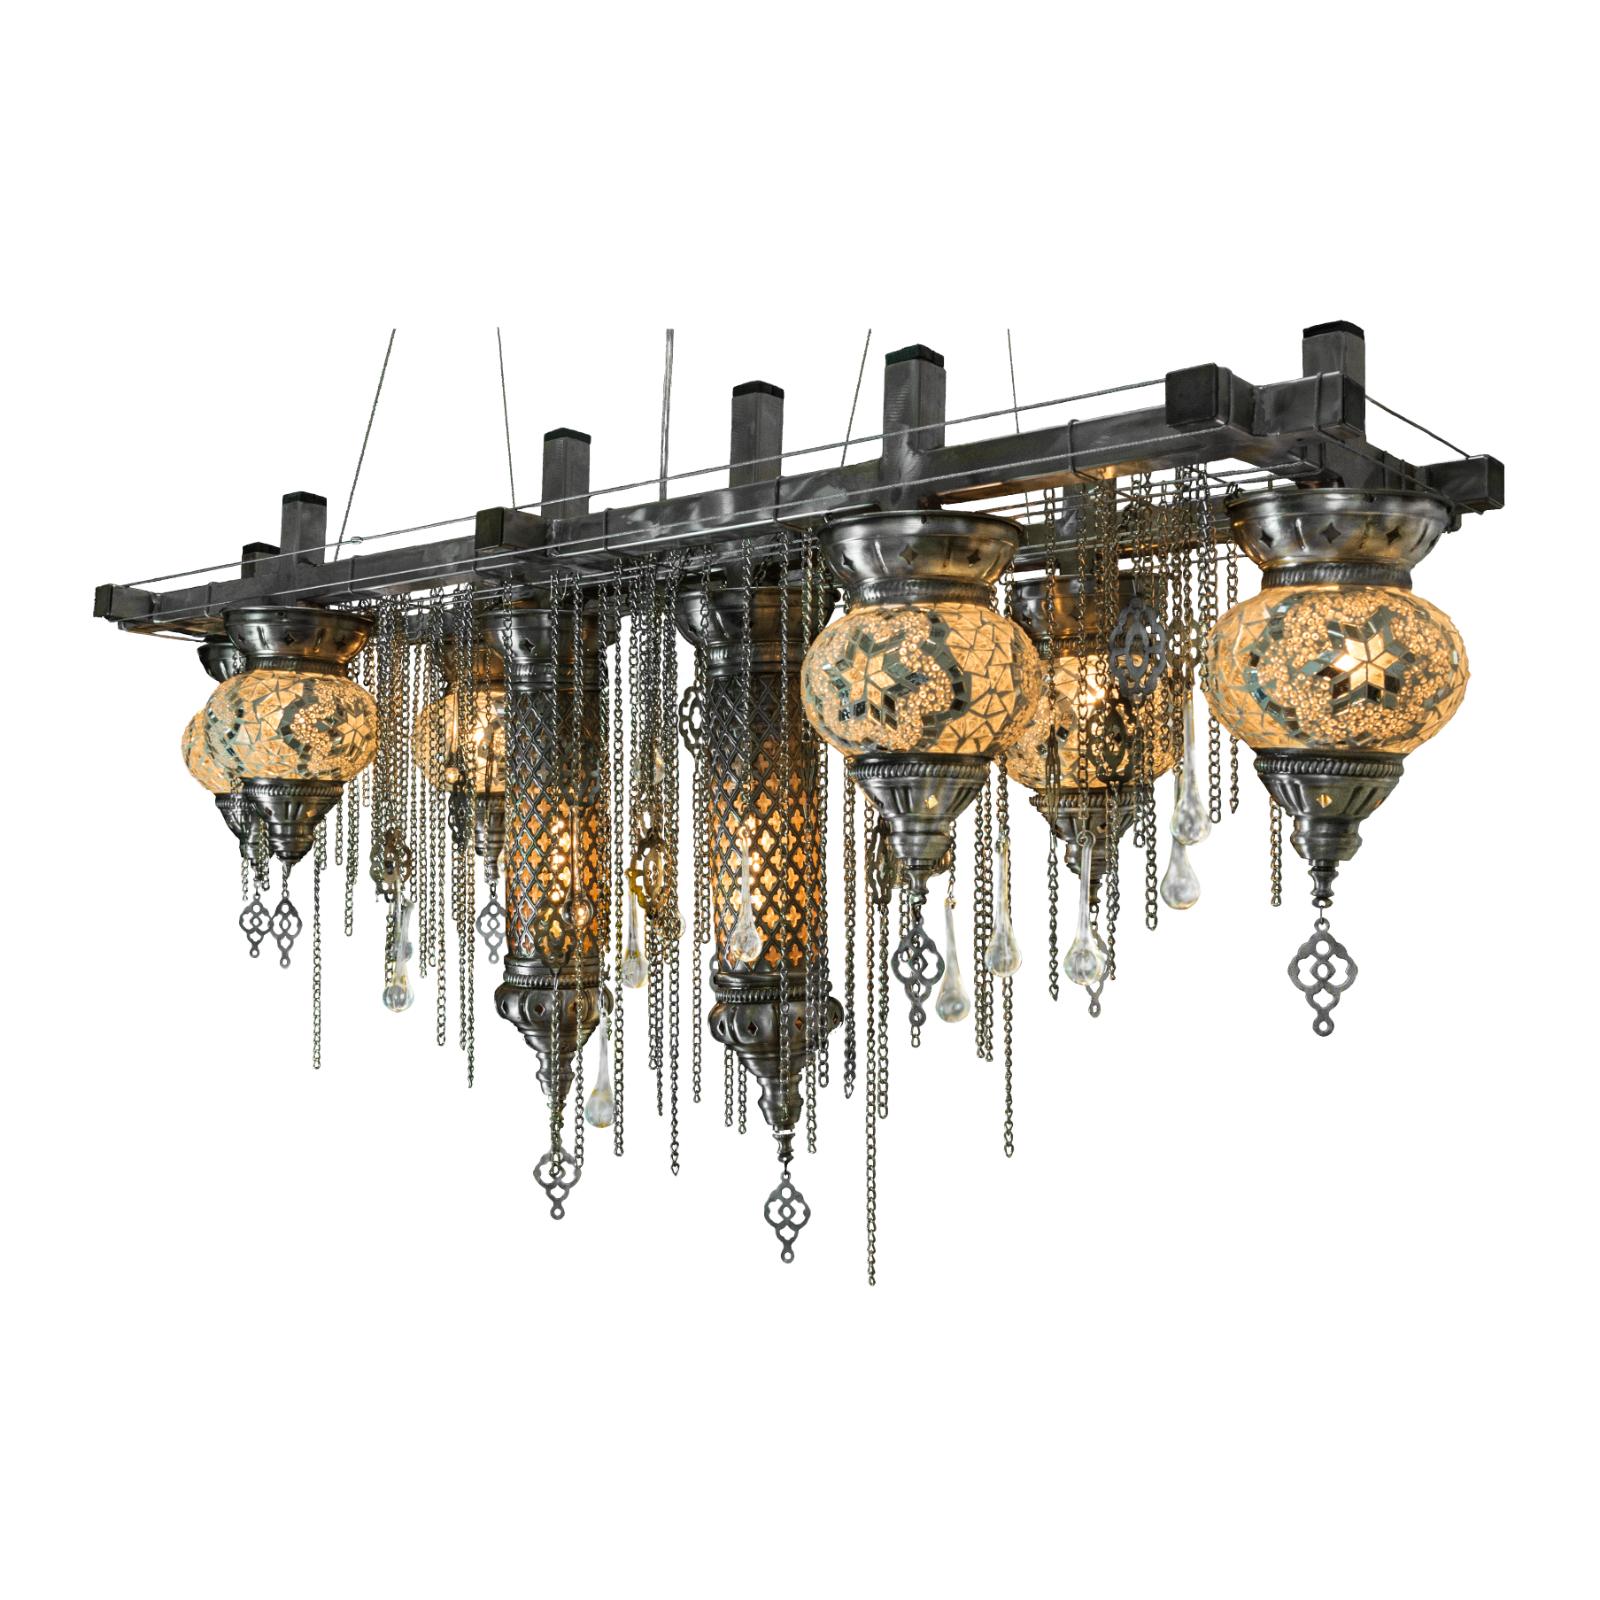 Matrix Istanbul linear suspension chandelier by Michael McHale
Dimensions: D 23 x W 107 x H 45.5 cm.
Materials: Steel, glass, chain, crystal.

8 x candelabra base CA7 bulb, either incandescent or LED.

All our lamps can be wired according to